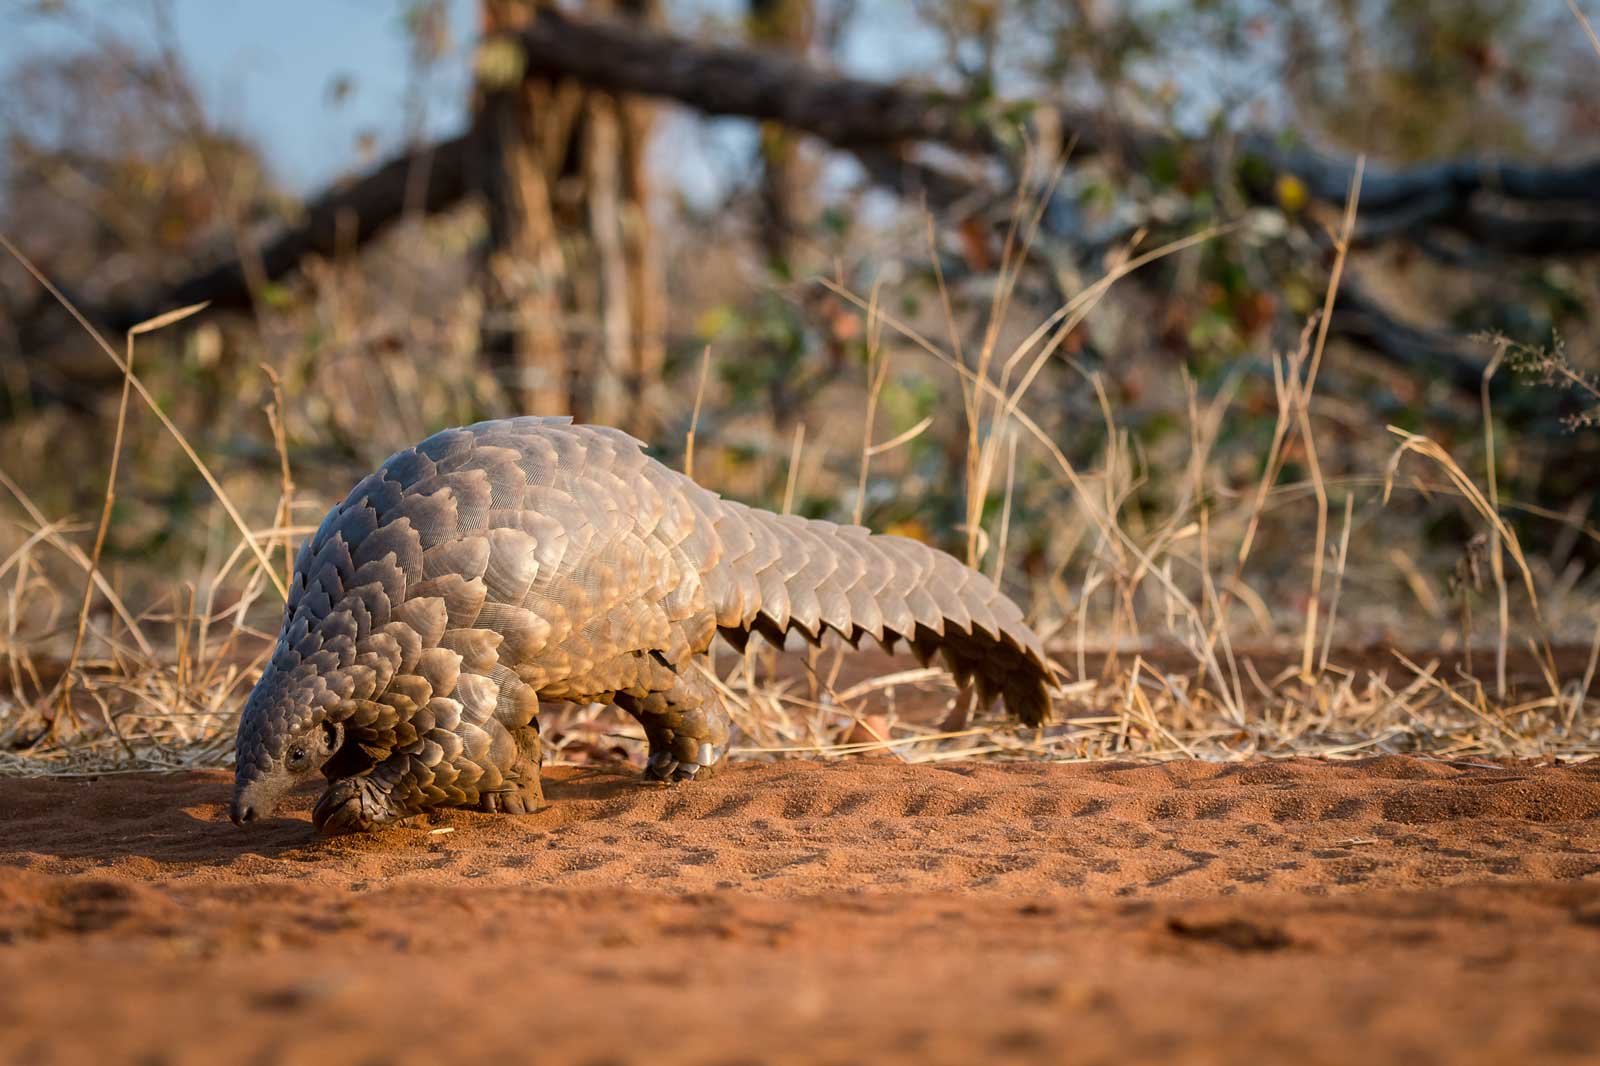 Collection of Photos of Pangolin Sightings in the Greater Kruger1600 x 1066